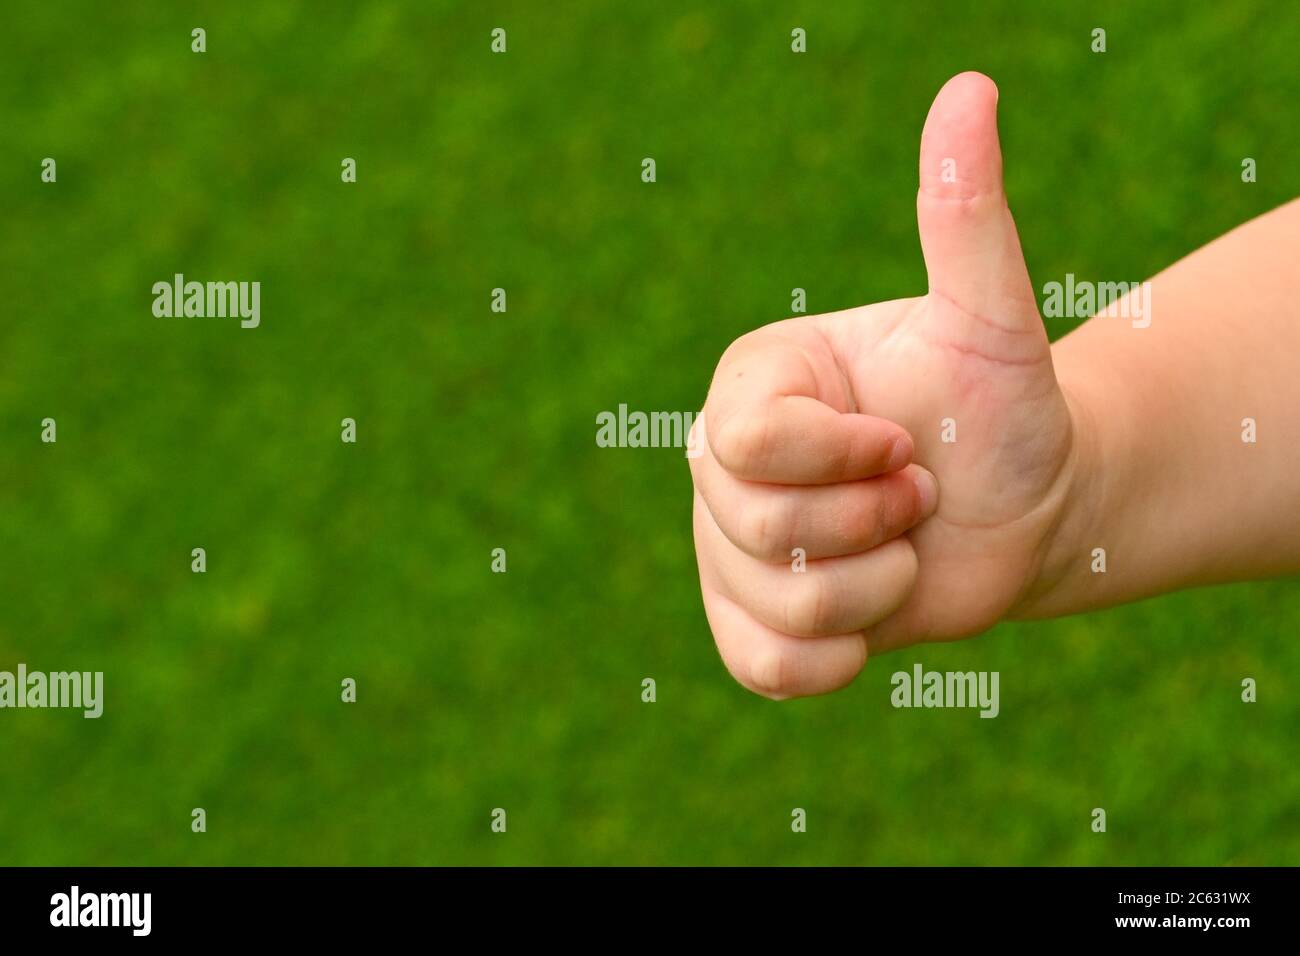 Thumbs up sign from a young person against a plain green background. Copy space. Stock Photo